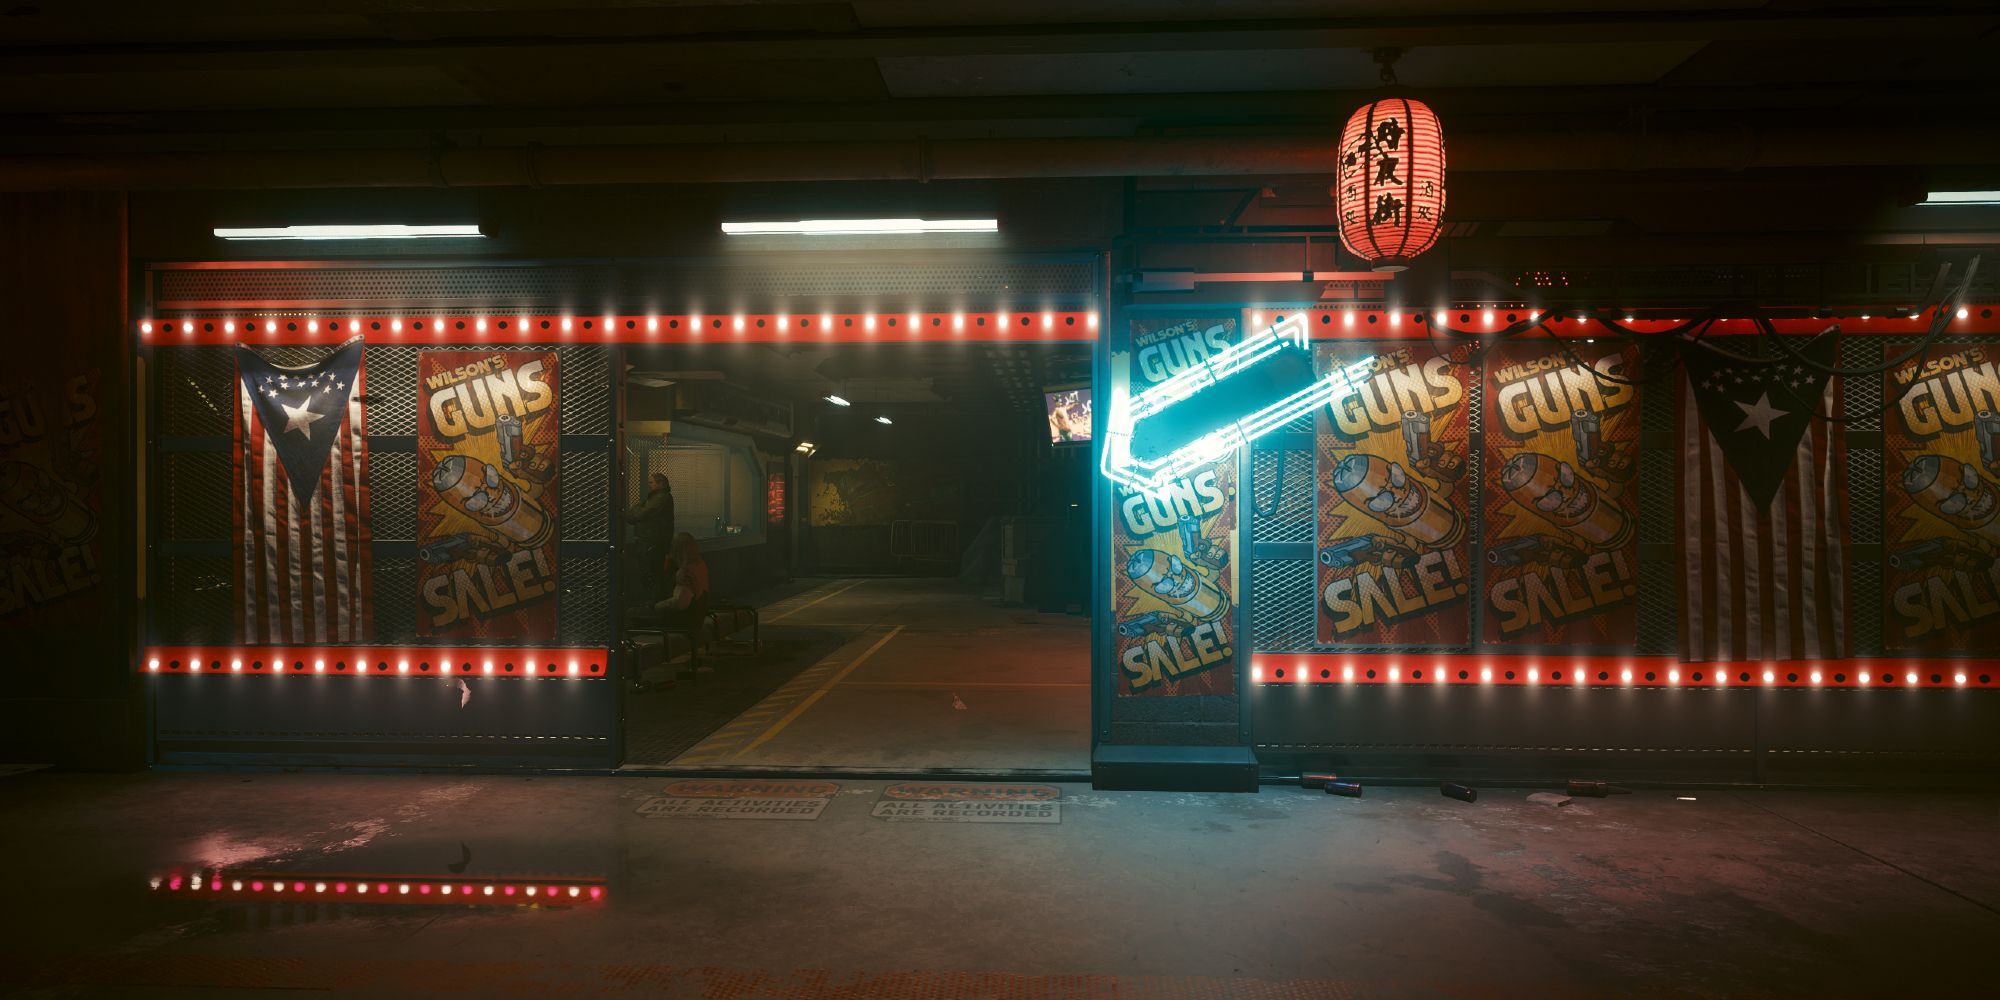 Shooting range with festive signs in Cyberpunk 2077.